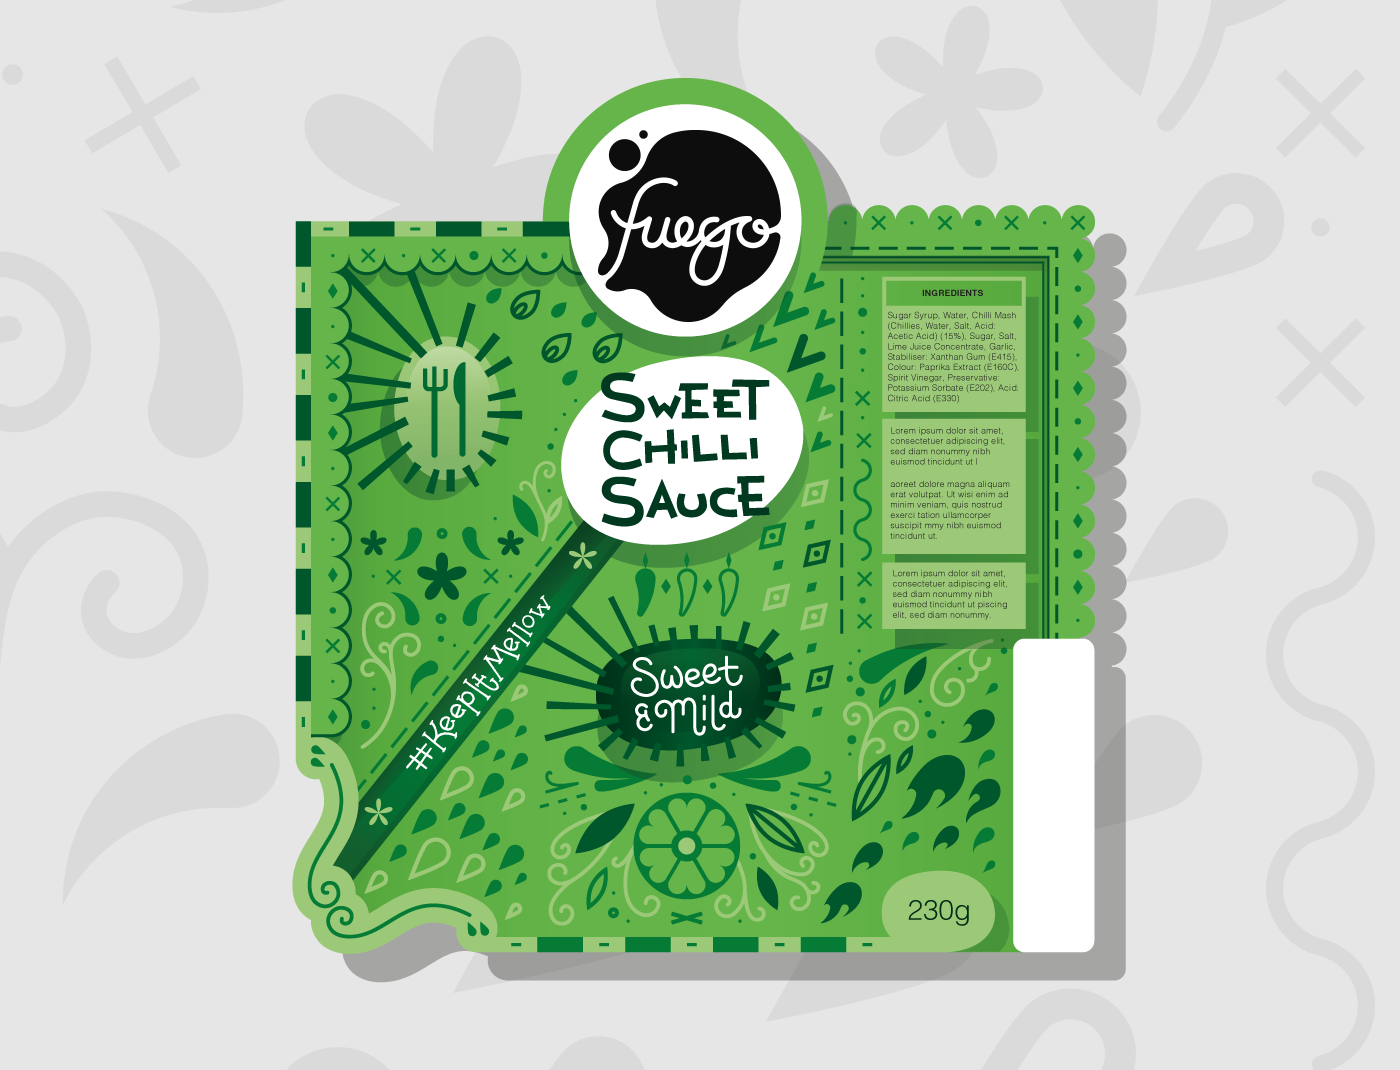 fuego Chilli Mexican mexico spicy hot sauce product packaging label design sweet sauce pattern